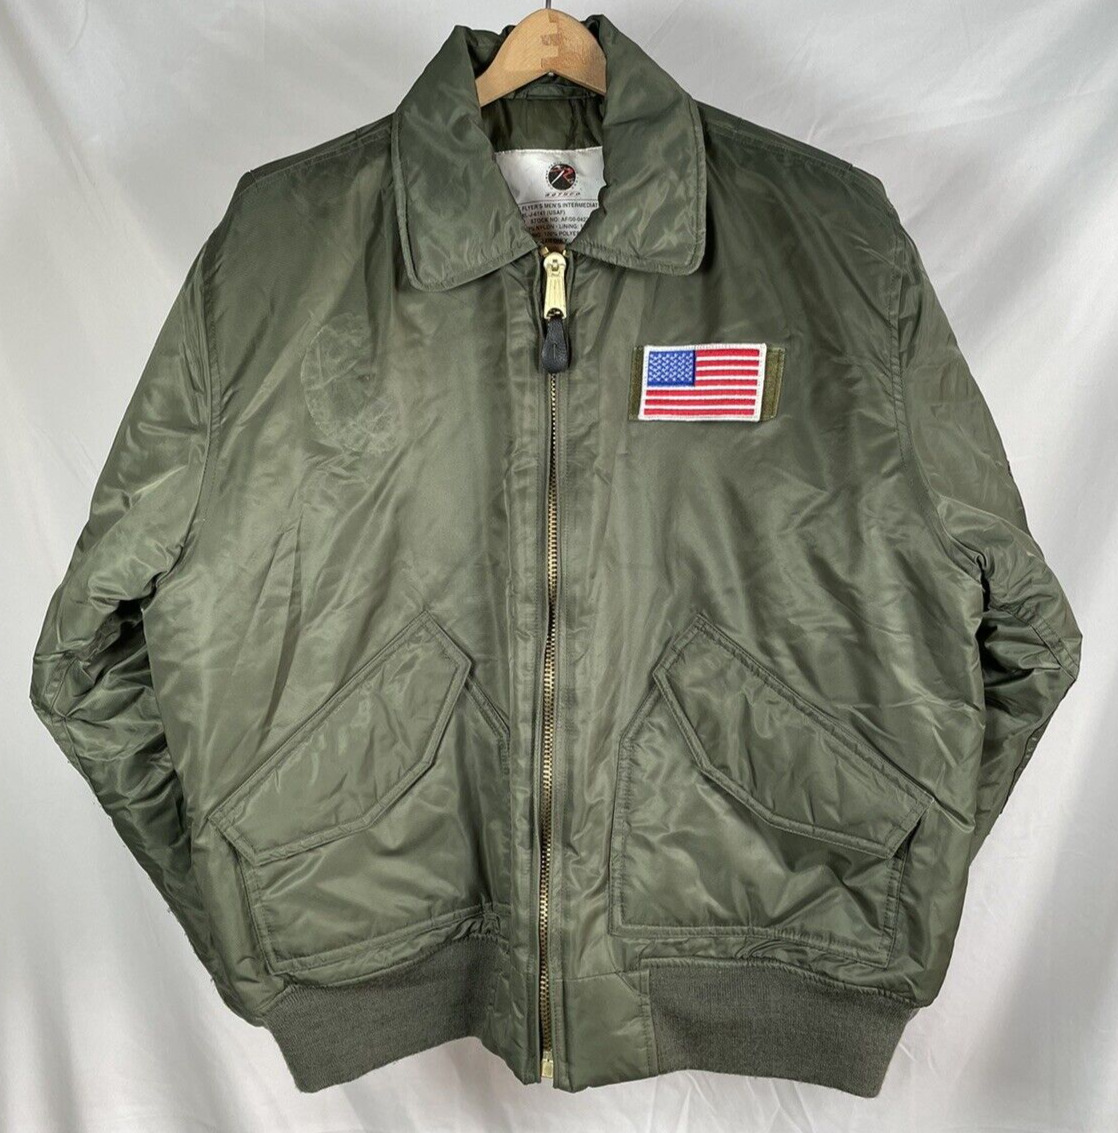 Rothco Flyer\'s Jacket Coat USAF CWU-45P MIL-J-6141 Green Large L ~ Very Nice